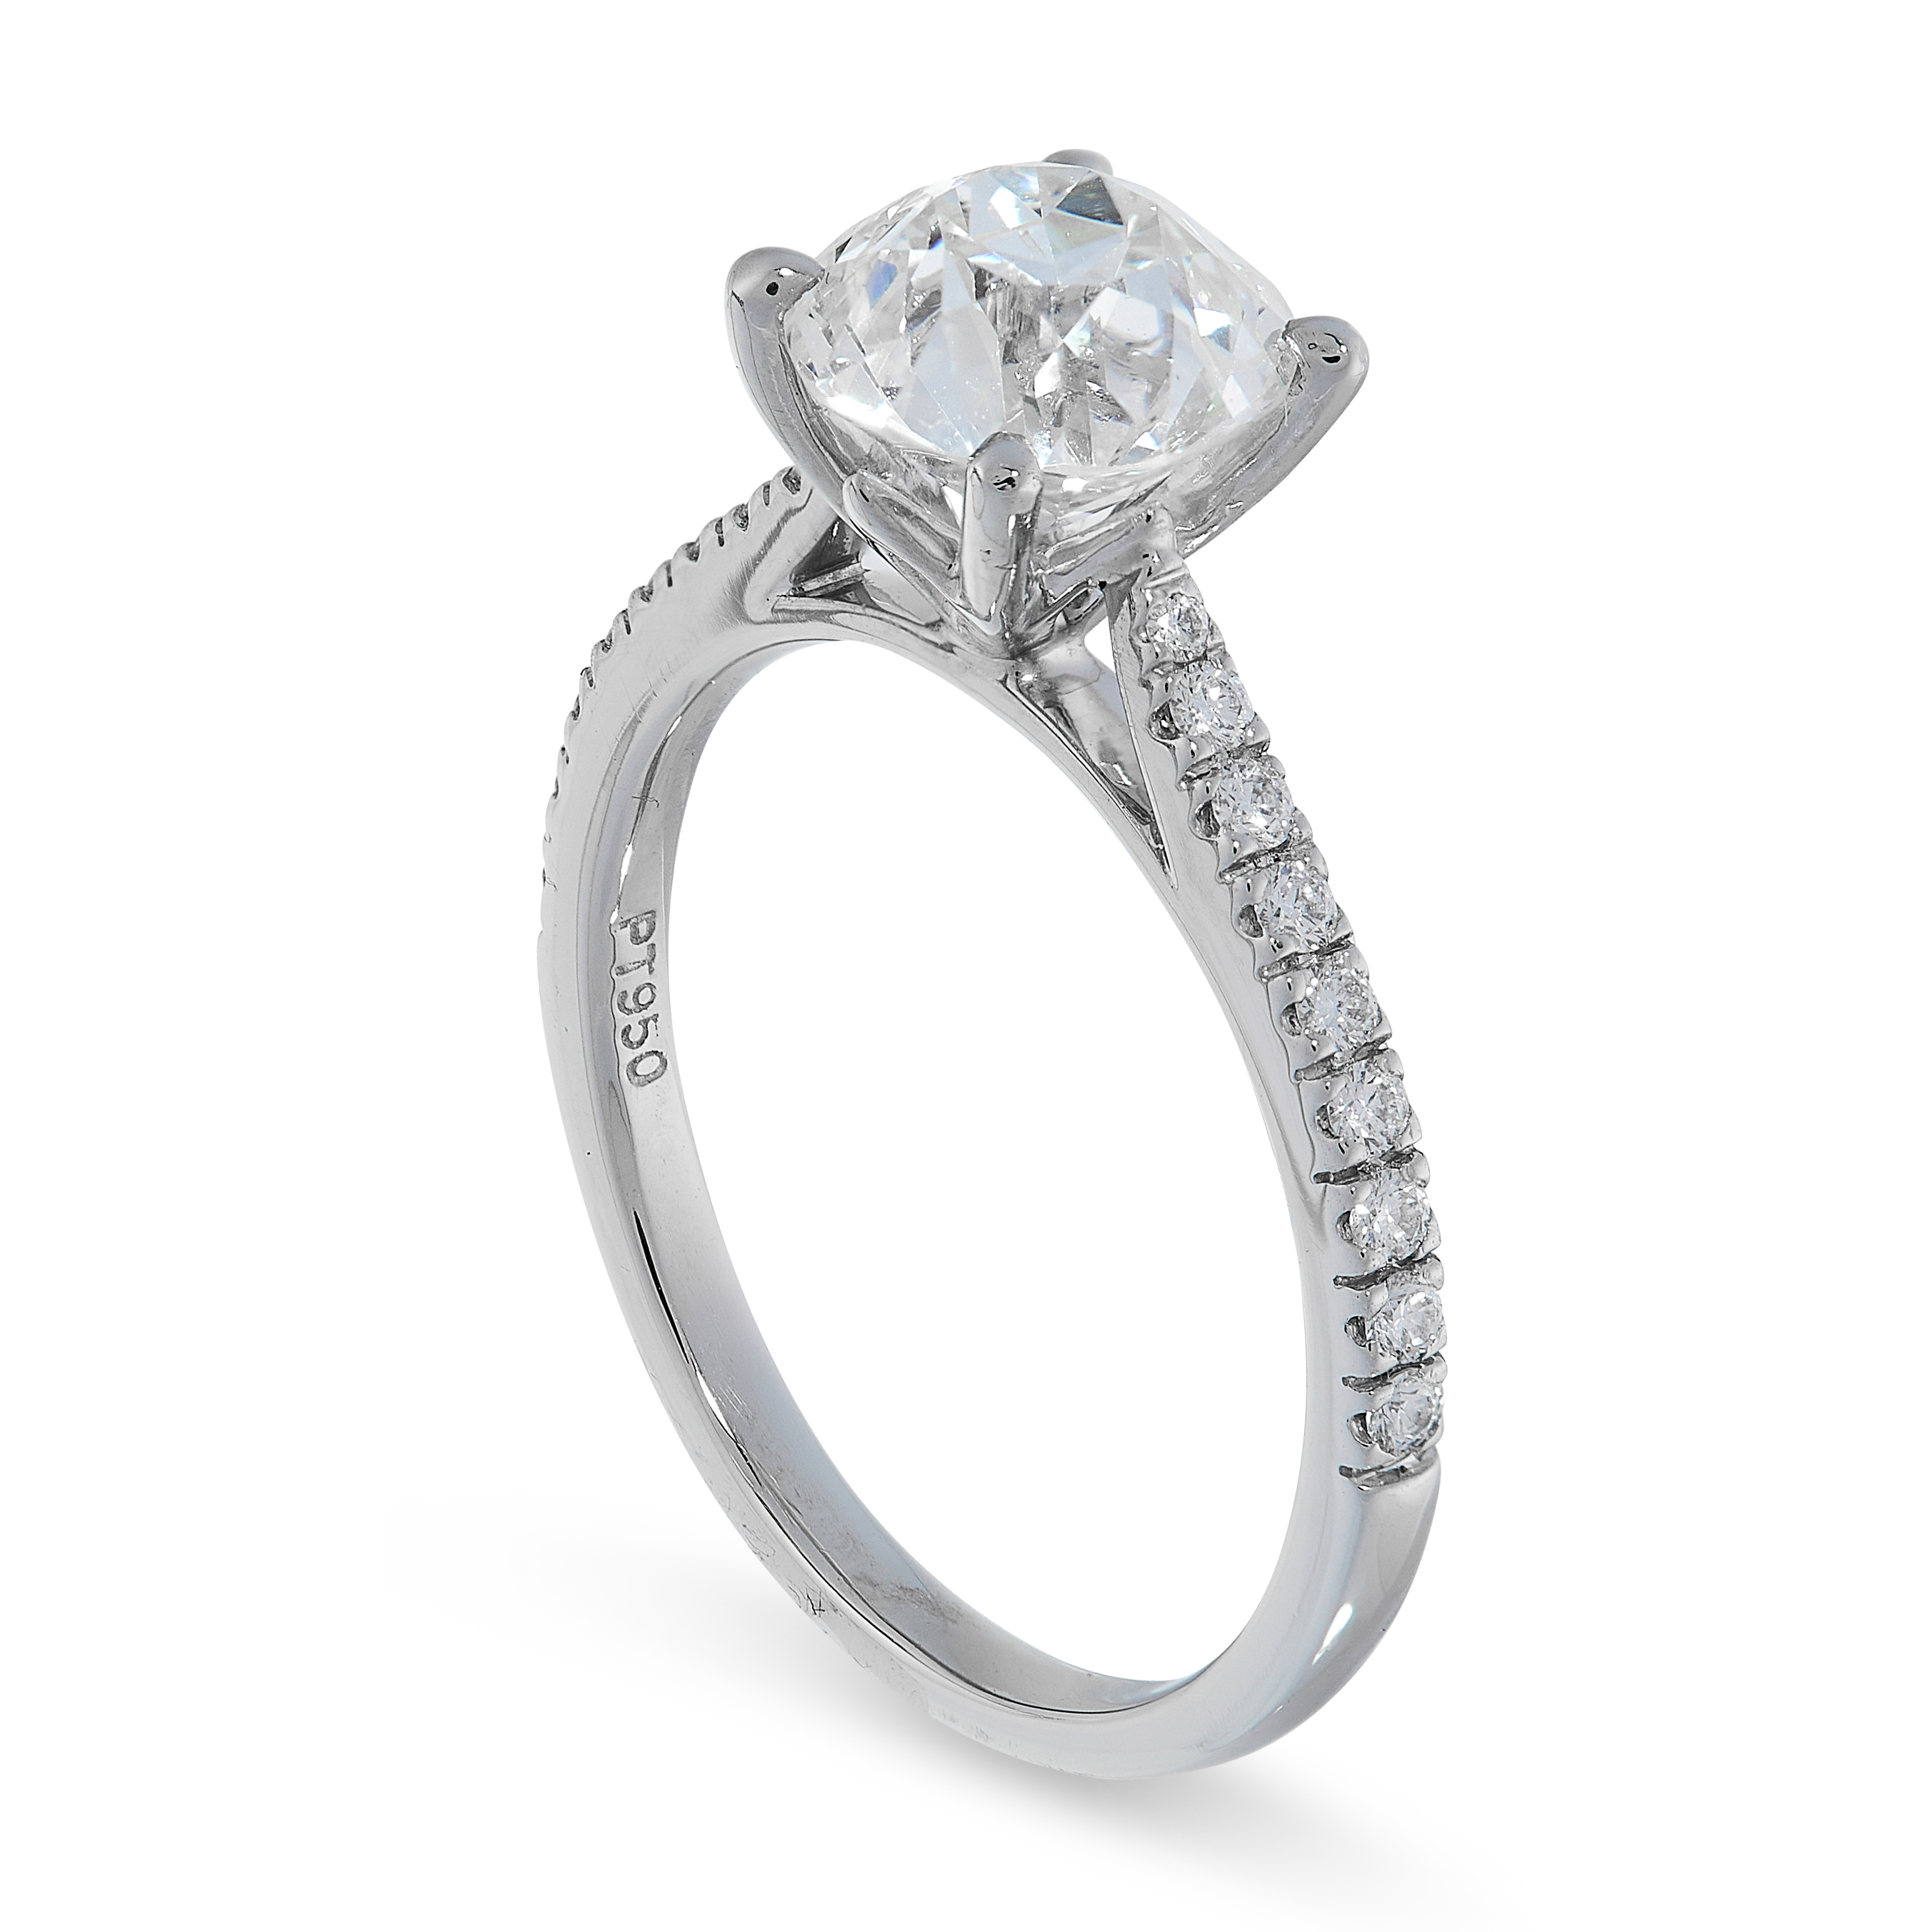 A SOLITAIRE DIAMOND RING in platinum, set with an old cut diamond of 2.01 carats, the band set - Image 2 of 2